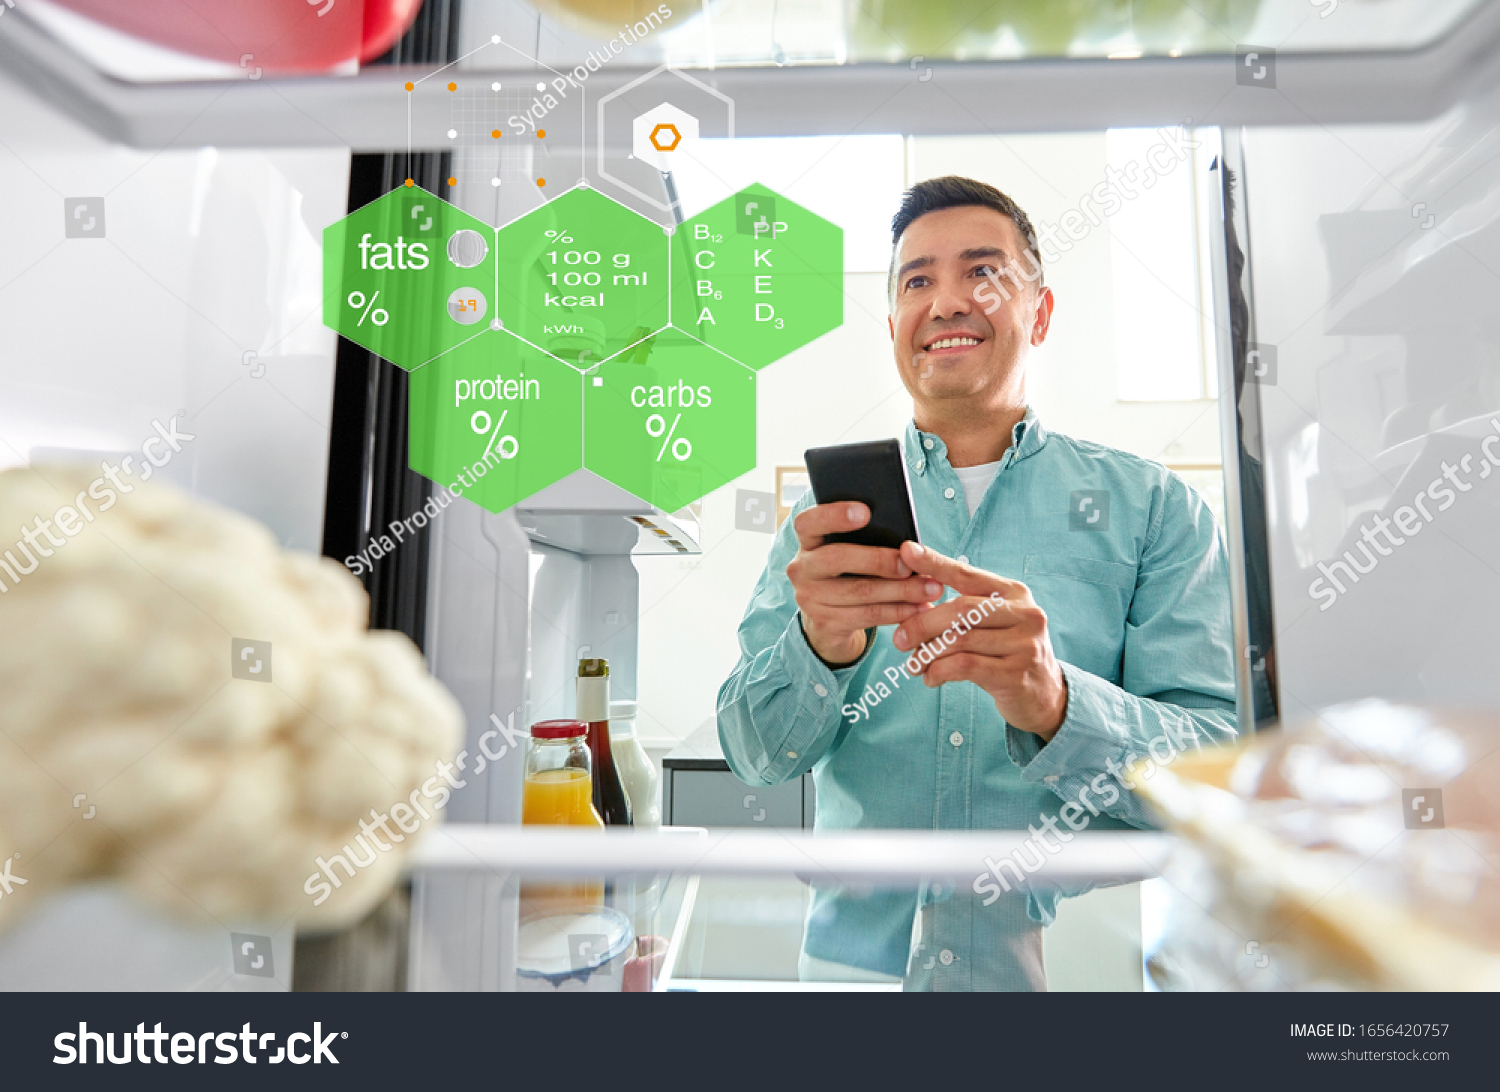 healthy eating, technology and diet concept - happy middle-aged man with smartphone at fridge at home kitchen over food nutritional value chart #1656420757